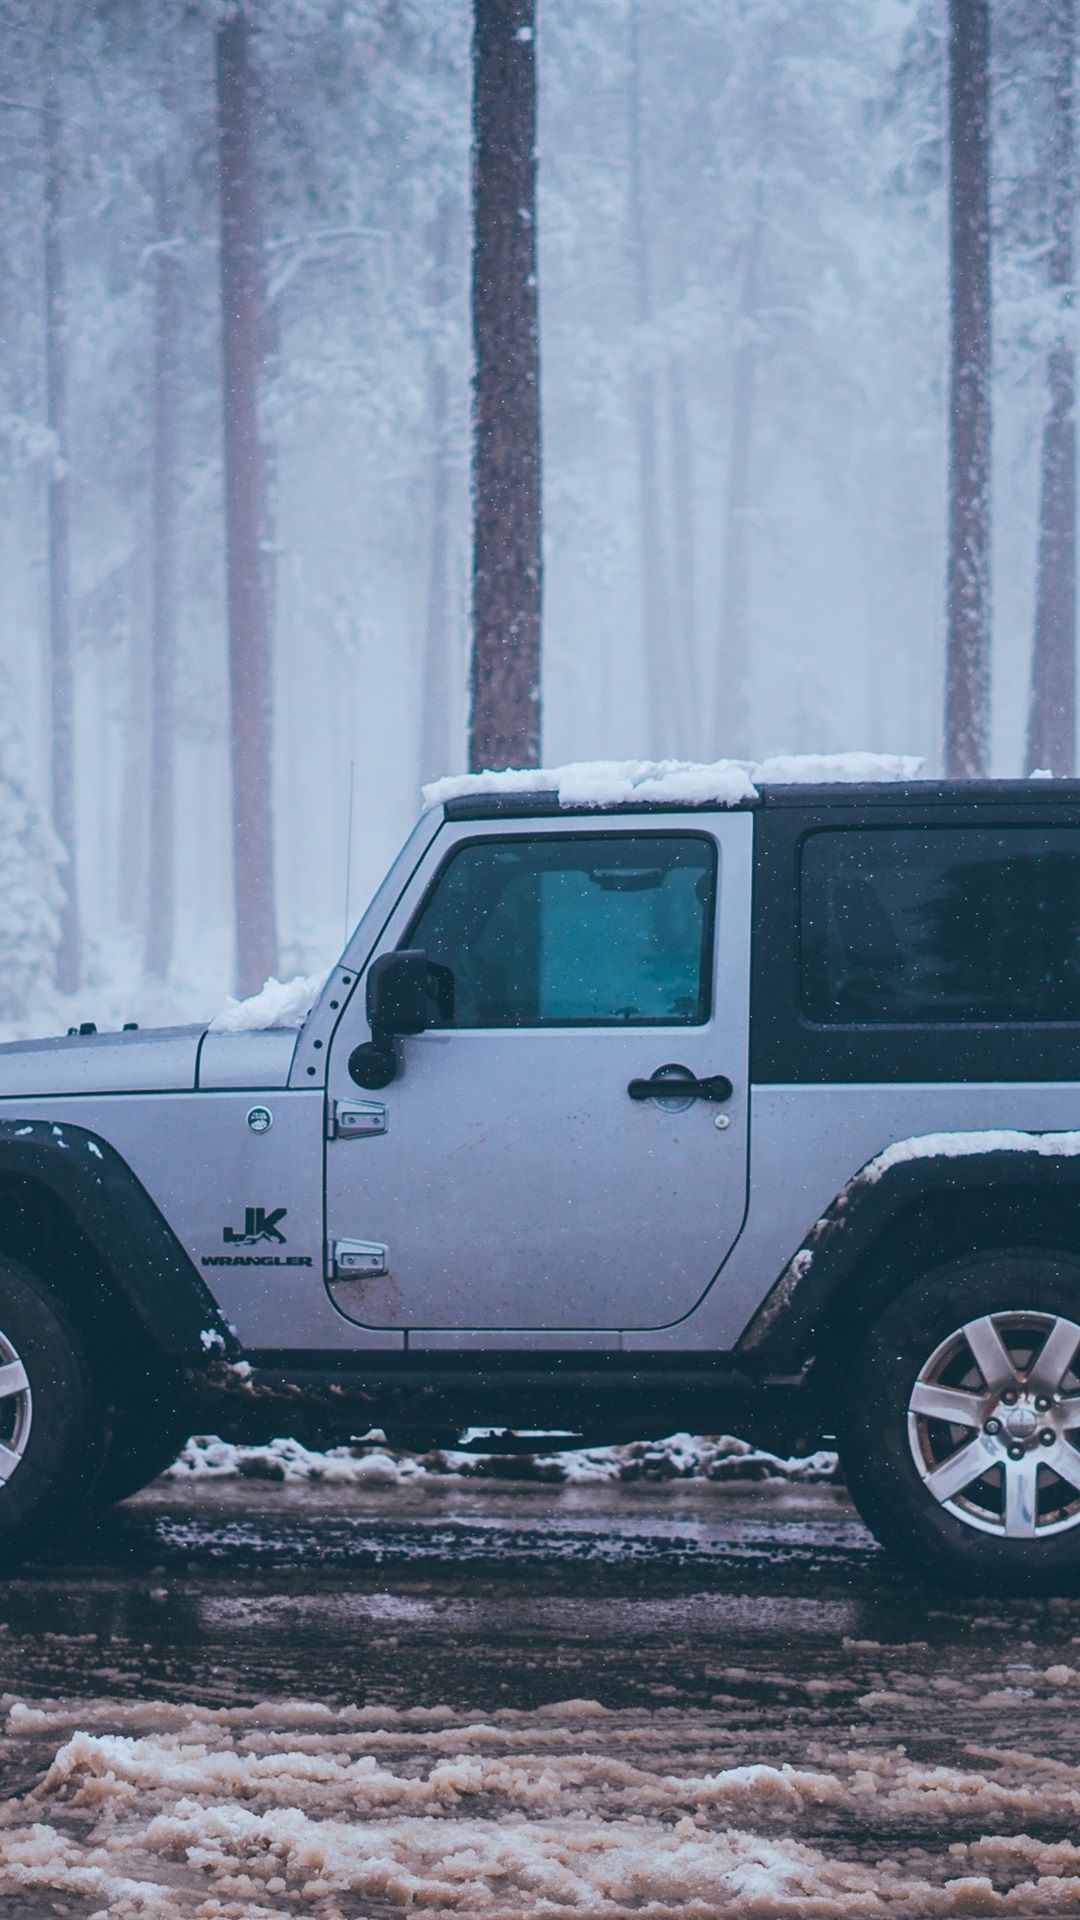 Jeep JK Wrangler Car Side View, Snow, Winter 1080x1920 IPhone 8 7 6 6S Plus Wallpaper, Background, Picture, Image